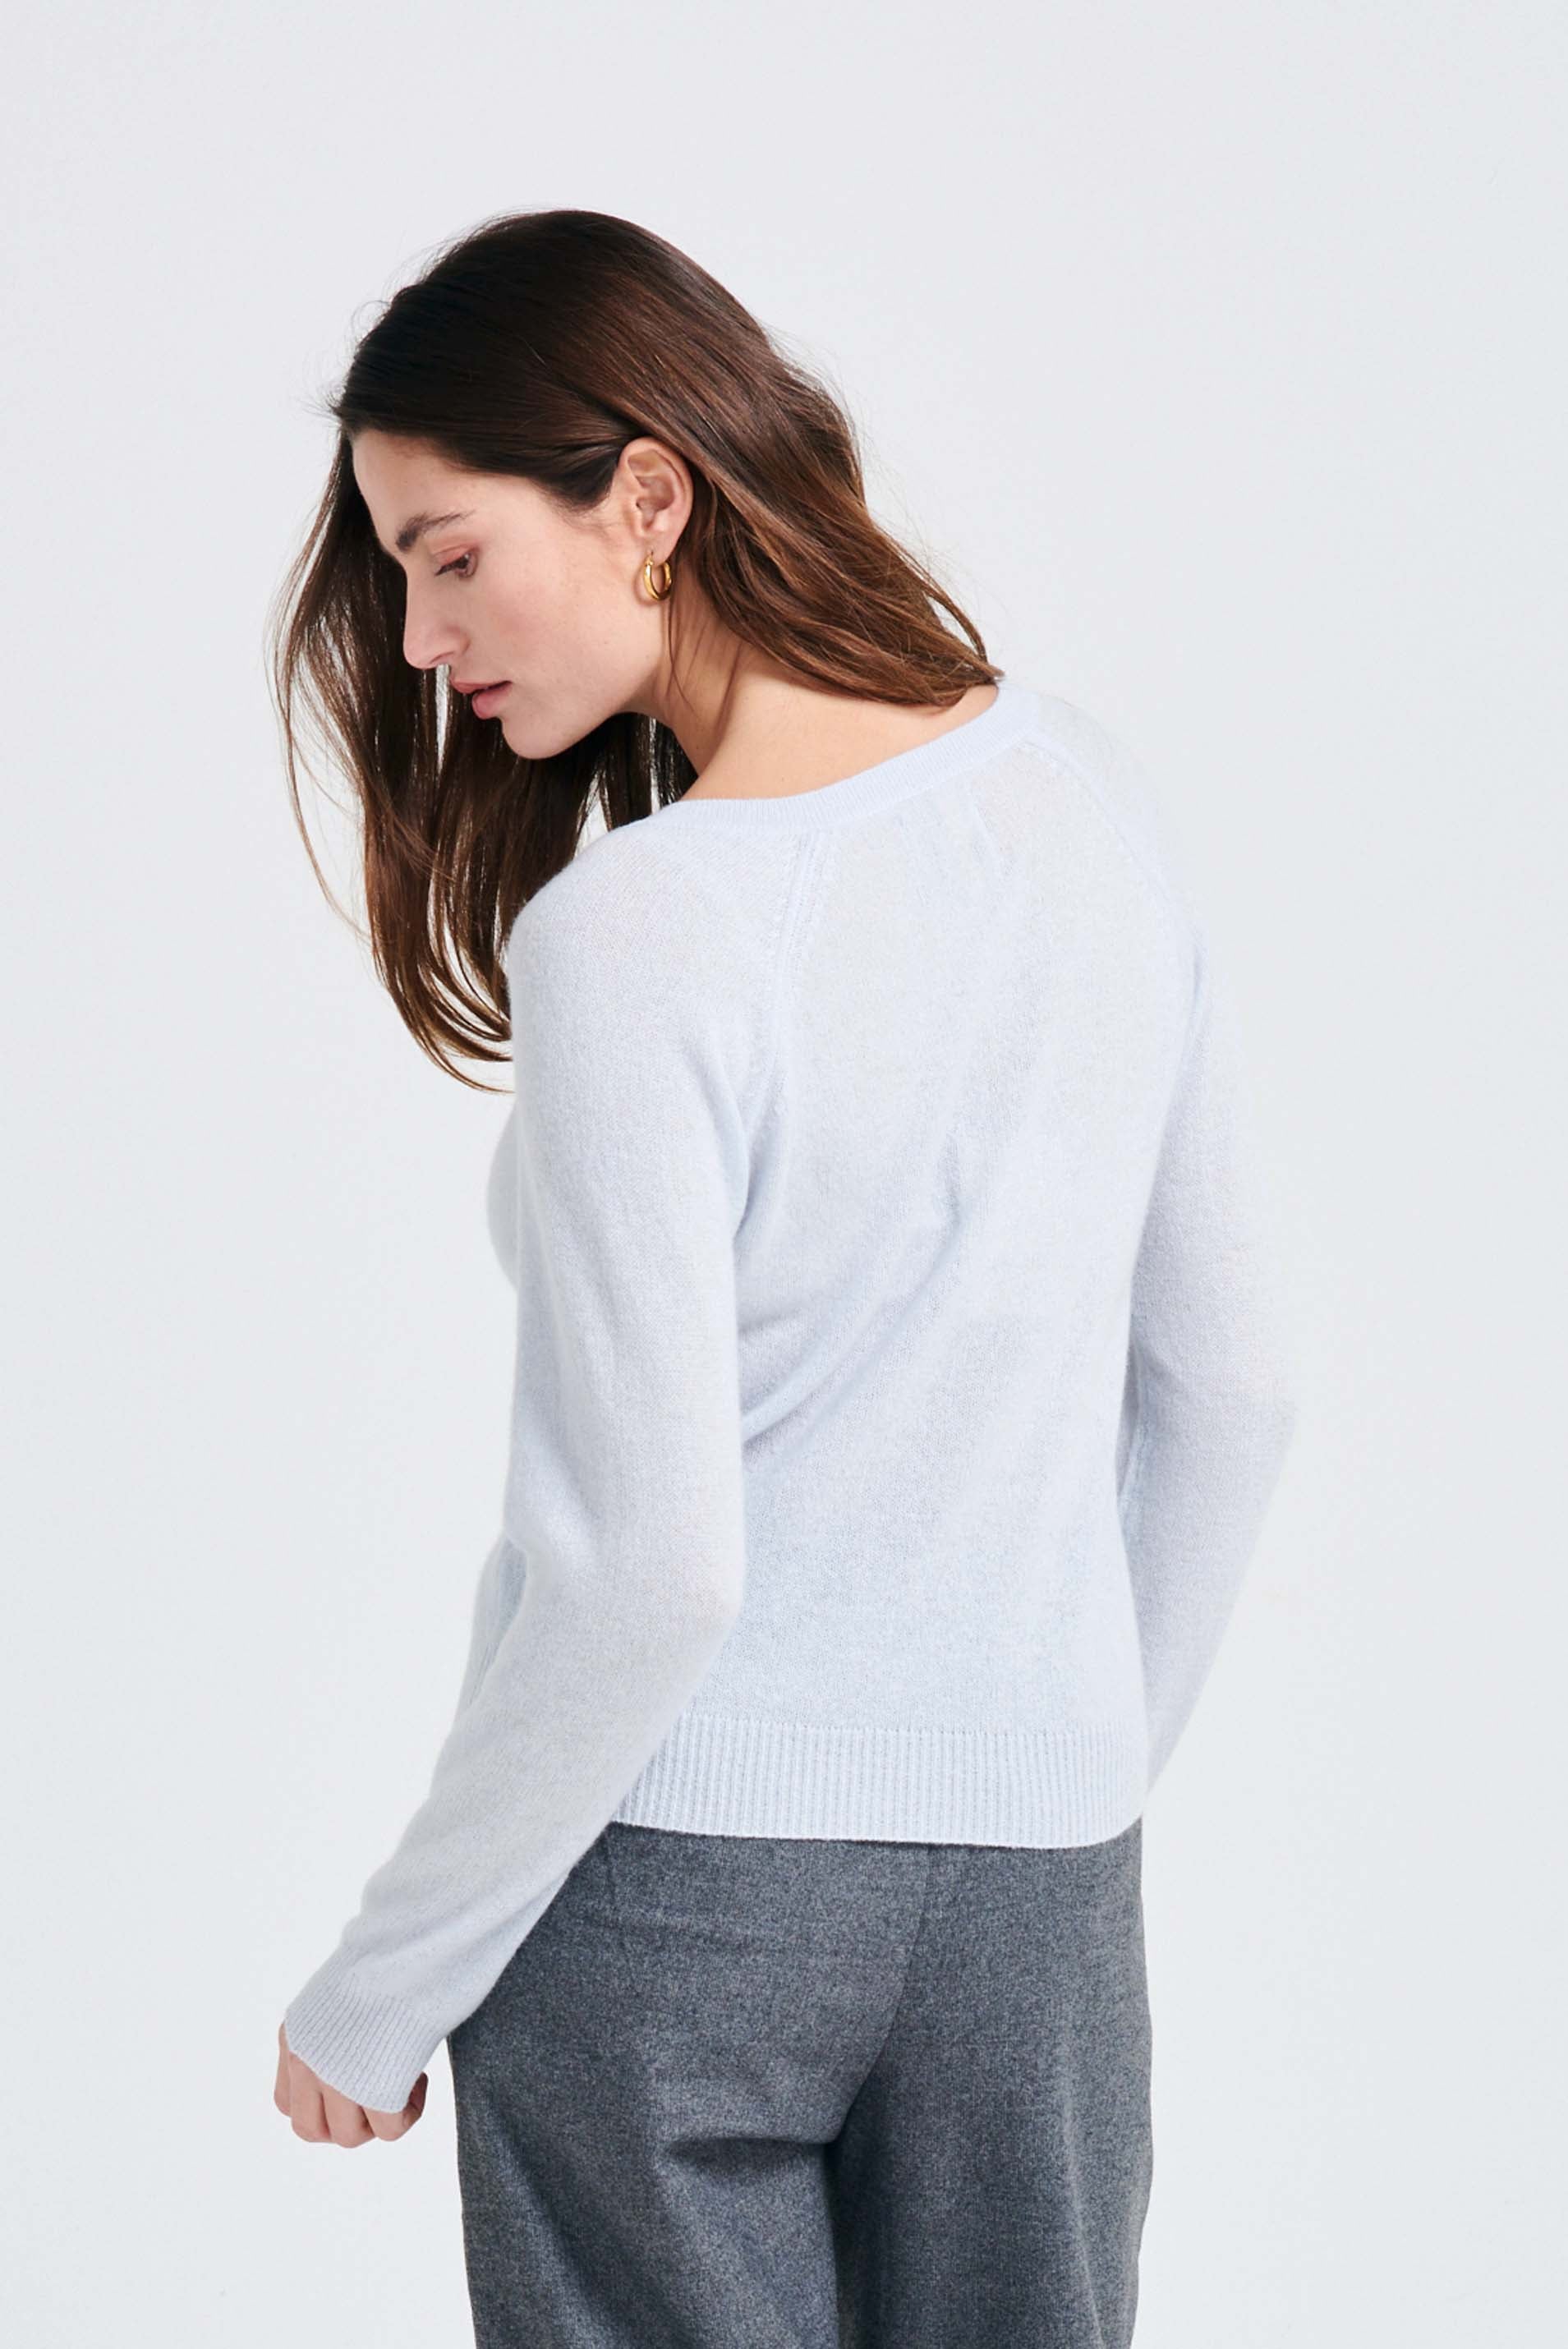 Brown haired female model wearing Jumper1234 pale blue lighter weight vee neck cashmere jumper facing away from the camera